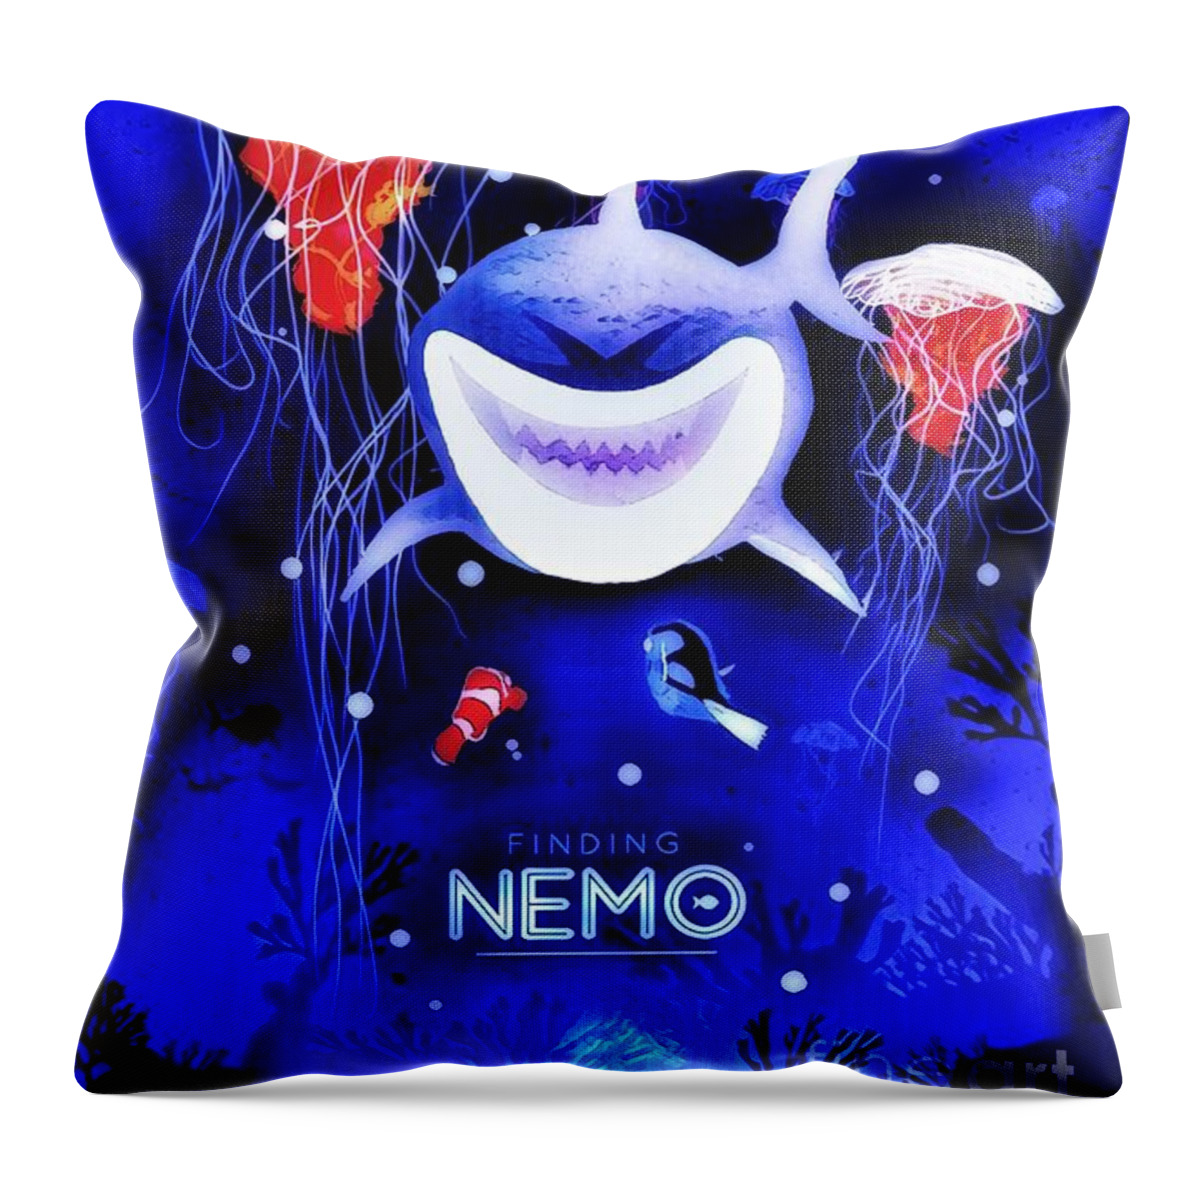 Nemo Throw Pillow featuring the digital art Finding Nemo by HELGE Art Gallery